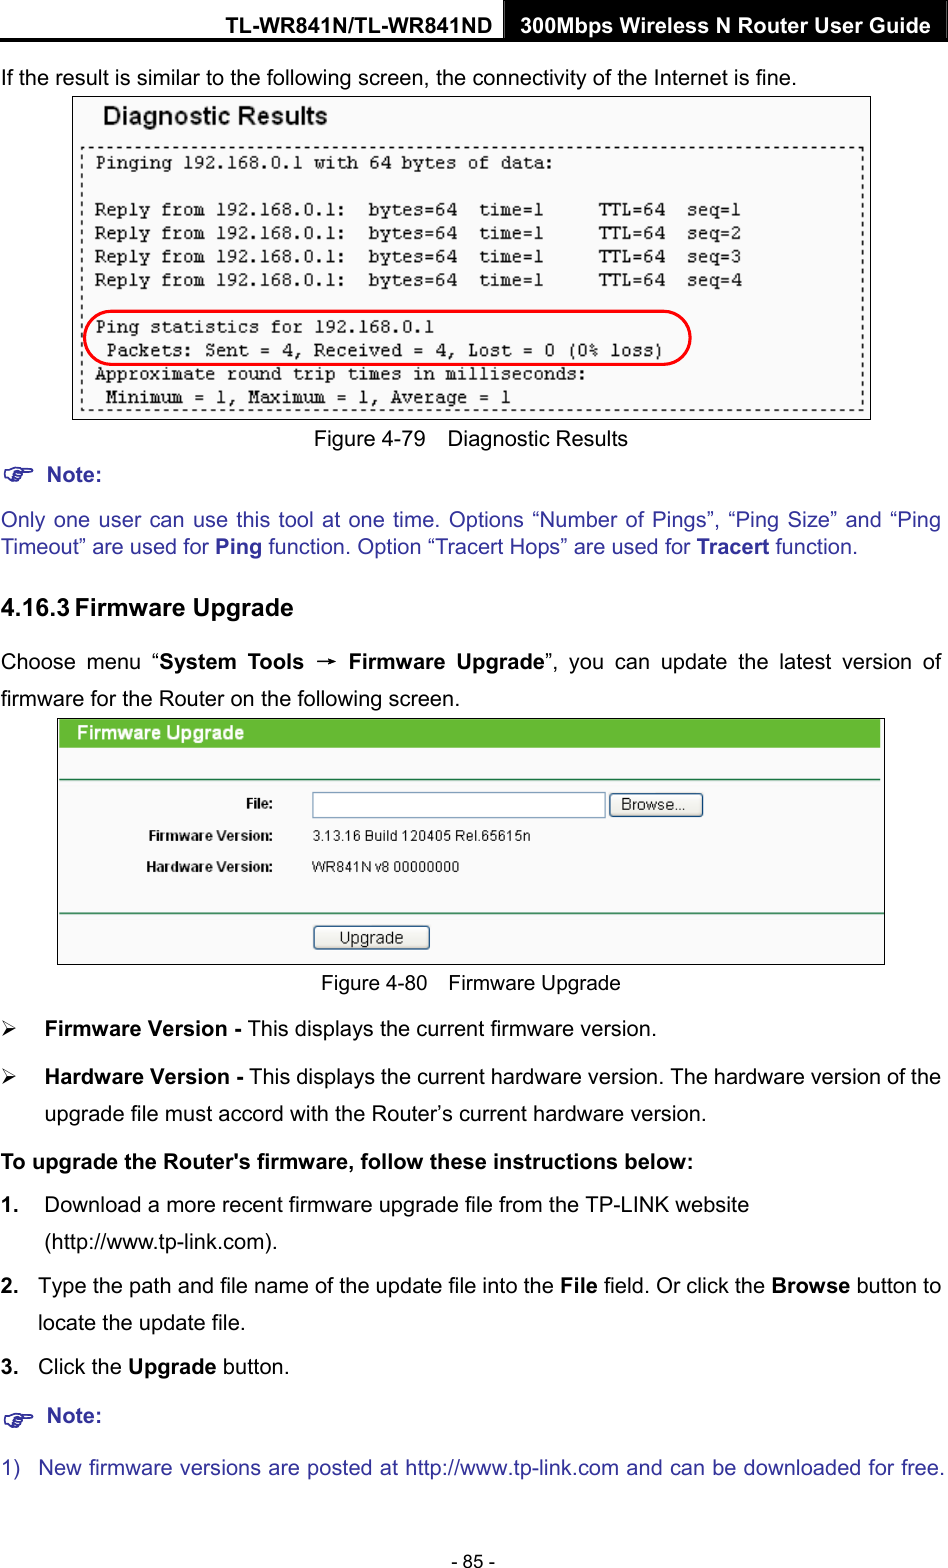 TL-WR841N/TL-WR841ND 300Mbps Wireless N Router User Guide - 85 - If the result is similar to the following screen, the connectivity of the Internet is fine.  Figure 4-79  Diagnostic Results ) Note: Only one user can use this tool at one time. Options “Number of Pings”, “Ping Size” and “Ping Timeout” are used for Ping function. Option “Tracert Hops” are used for Tracert function. 4.16.3 Firmware Upgrade Choose menu “System Tools → Firmware Upgrade”, you can update the latest version of firmware for the Router on the following screen.  Figure 4-80  Firmware Upgrade ¾ Firmware Version - This displays the current firmware version. ¾ Hardware Version - This displays the current hardware version. The hardware version of the upgrade file must accord with the Router’s current hardware version. To upgrade the Router&apos;s firmware, follow these instructions below: 1.  Download a more recent firmware upgrade file from the TP-LINK website (http://www.tp-link.com).  2.  Type the path and file name of the update file into the File field. Or click the Browse button to locate the update file. 3.  Click the Upgrade button. ) Note: 1)  New firmware versions are posted at http://www.tp-link.com and can be downloaded for free. 